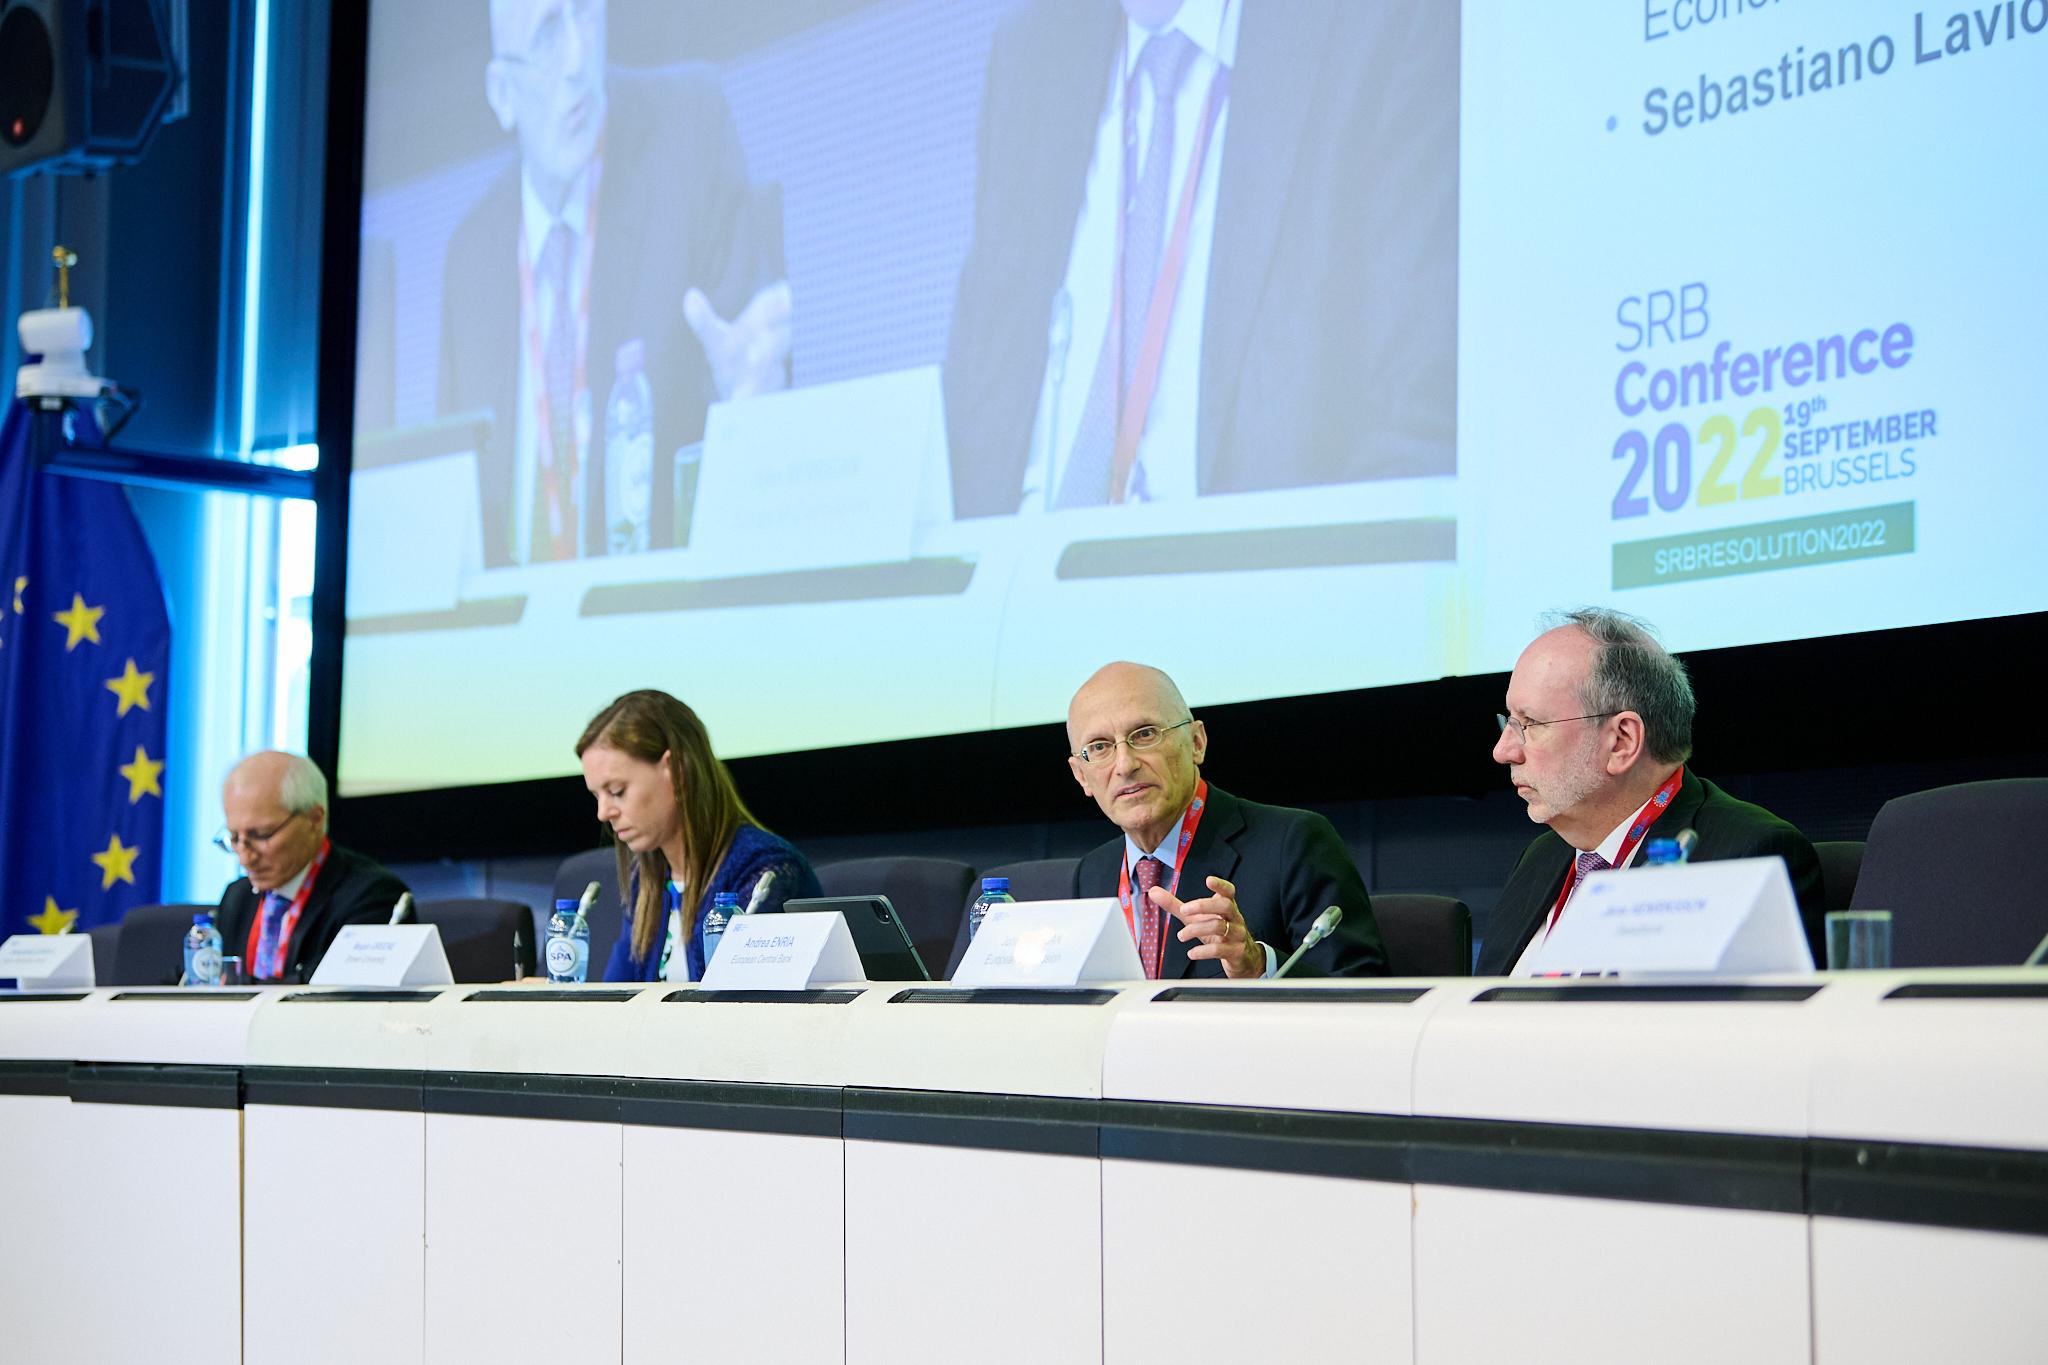 SRB Annual Conference 2022 - Panel 1 